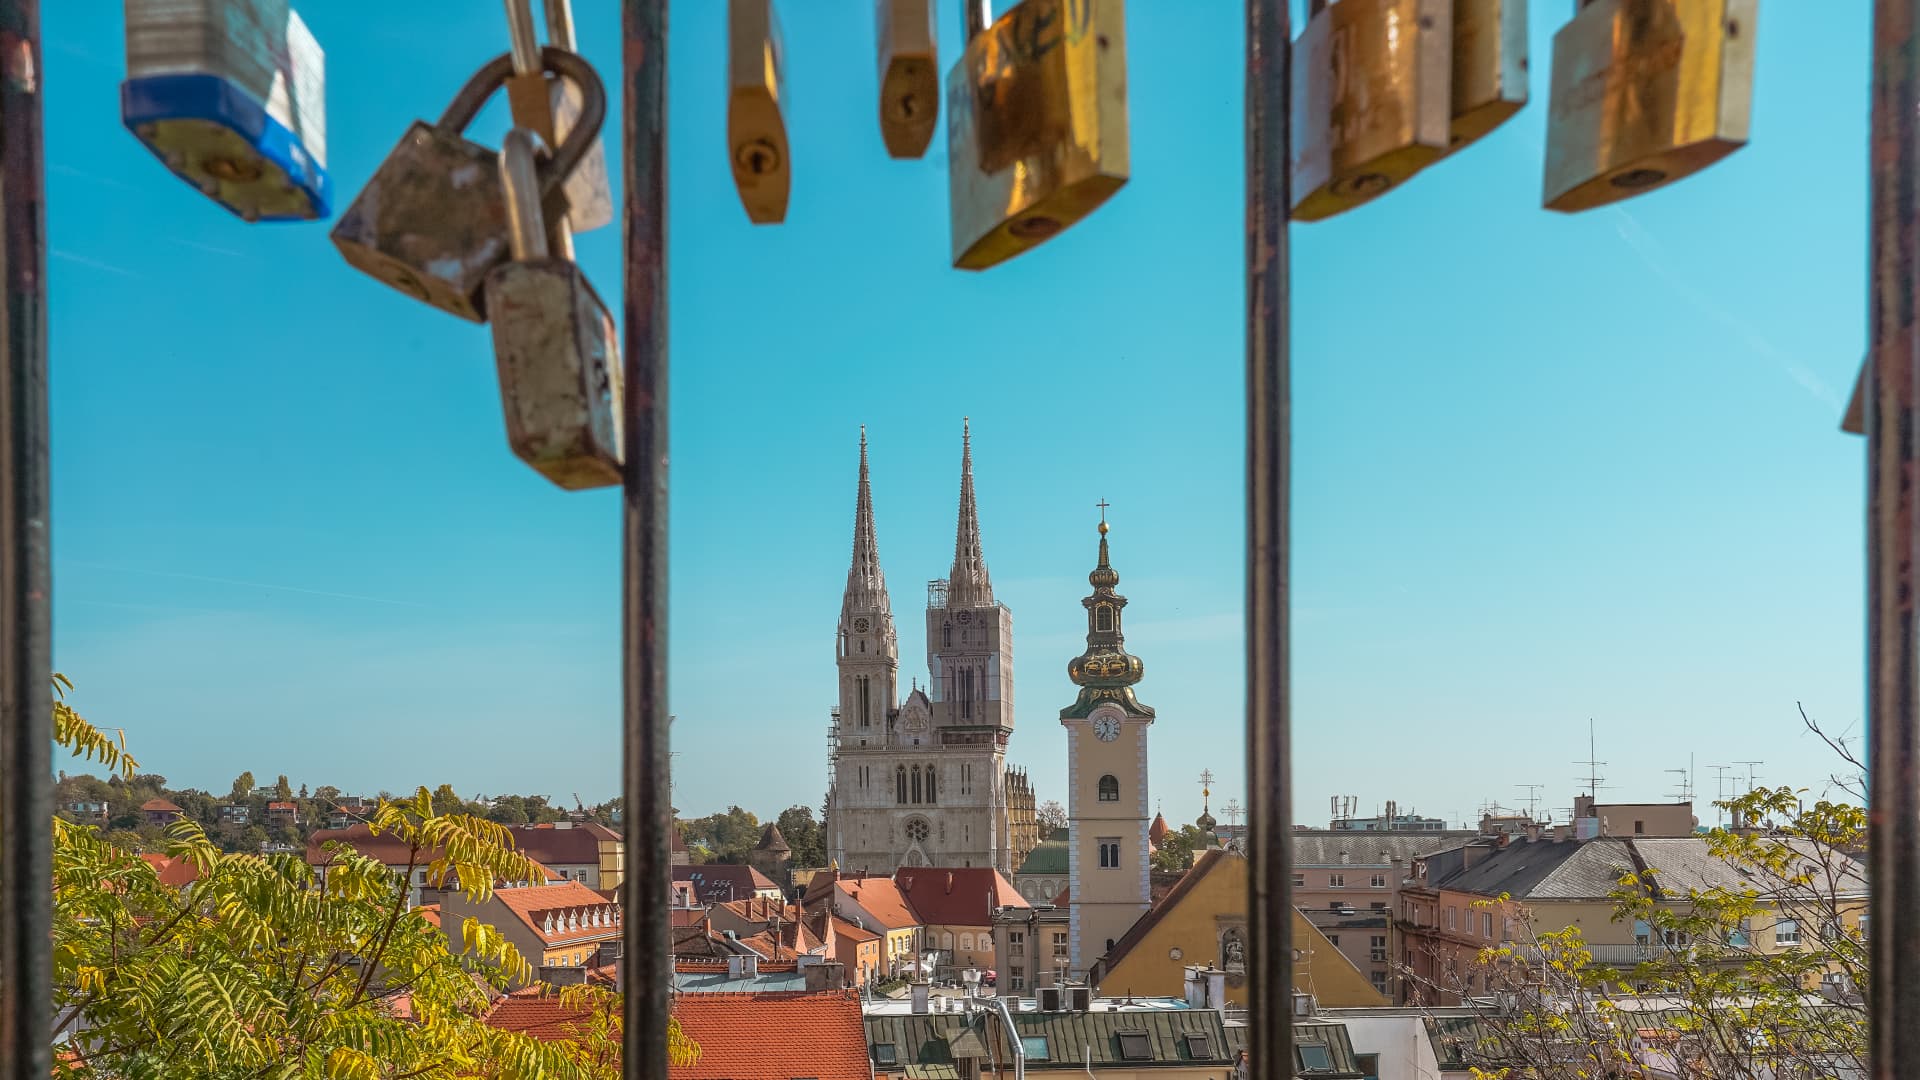 A view of the Zagreb Cathedral, a Roman Catholic cathedral-church and the second tallest building in Croatia.